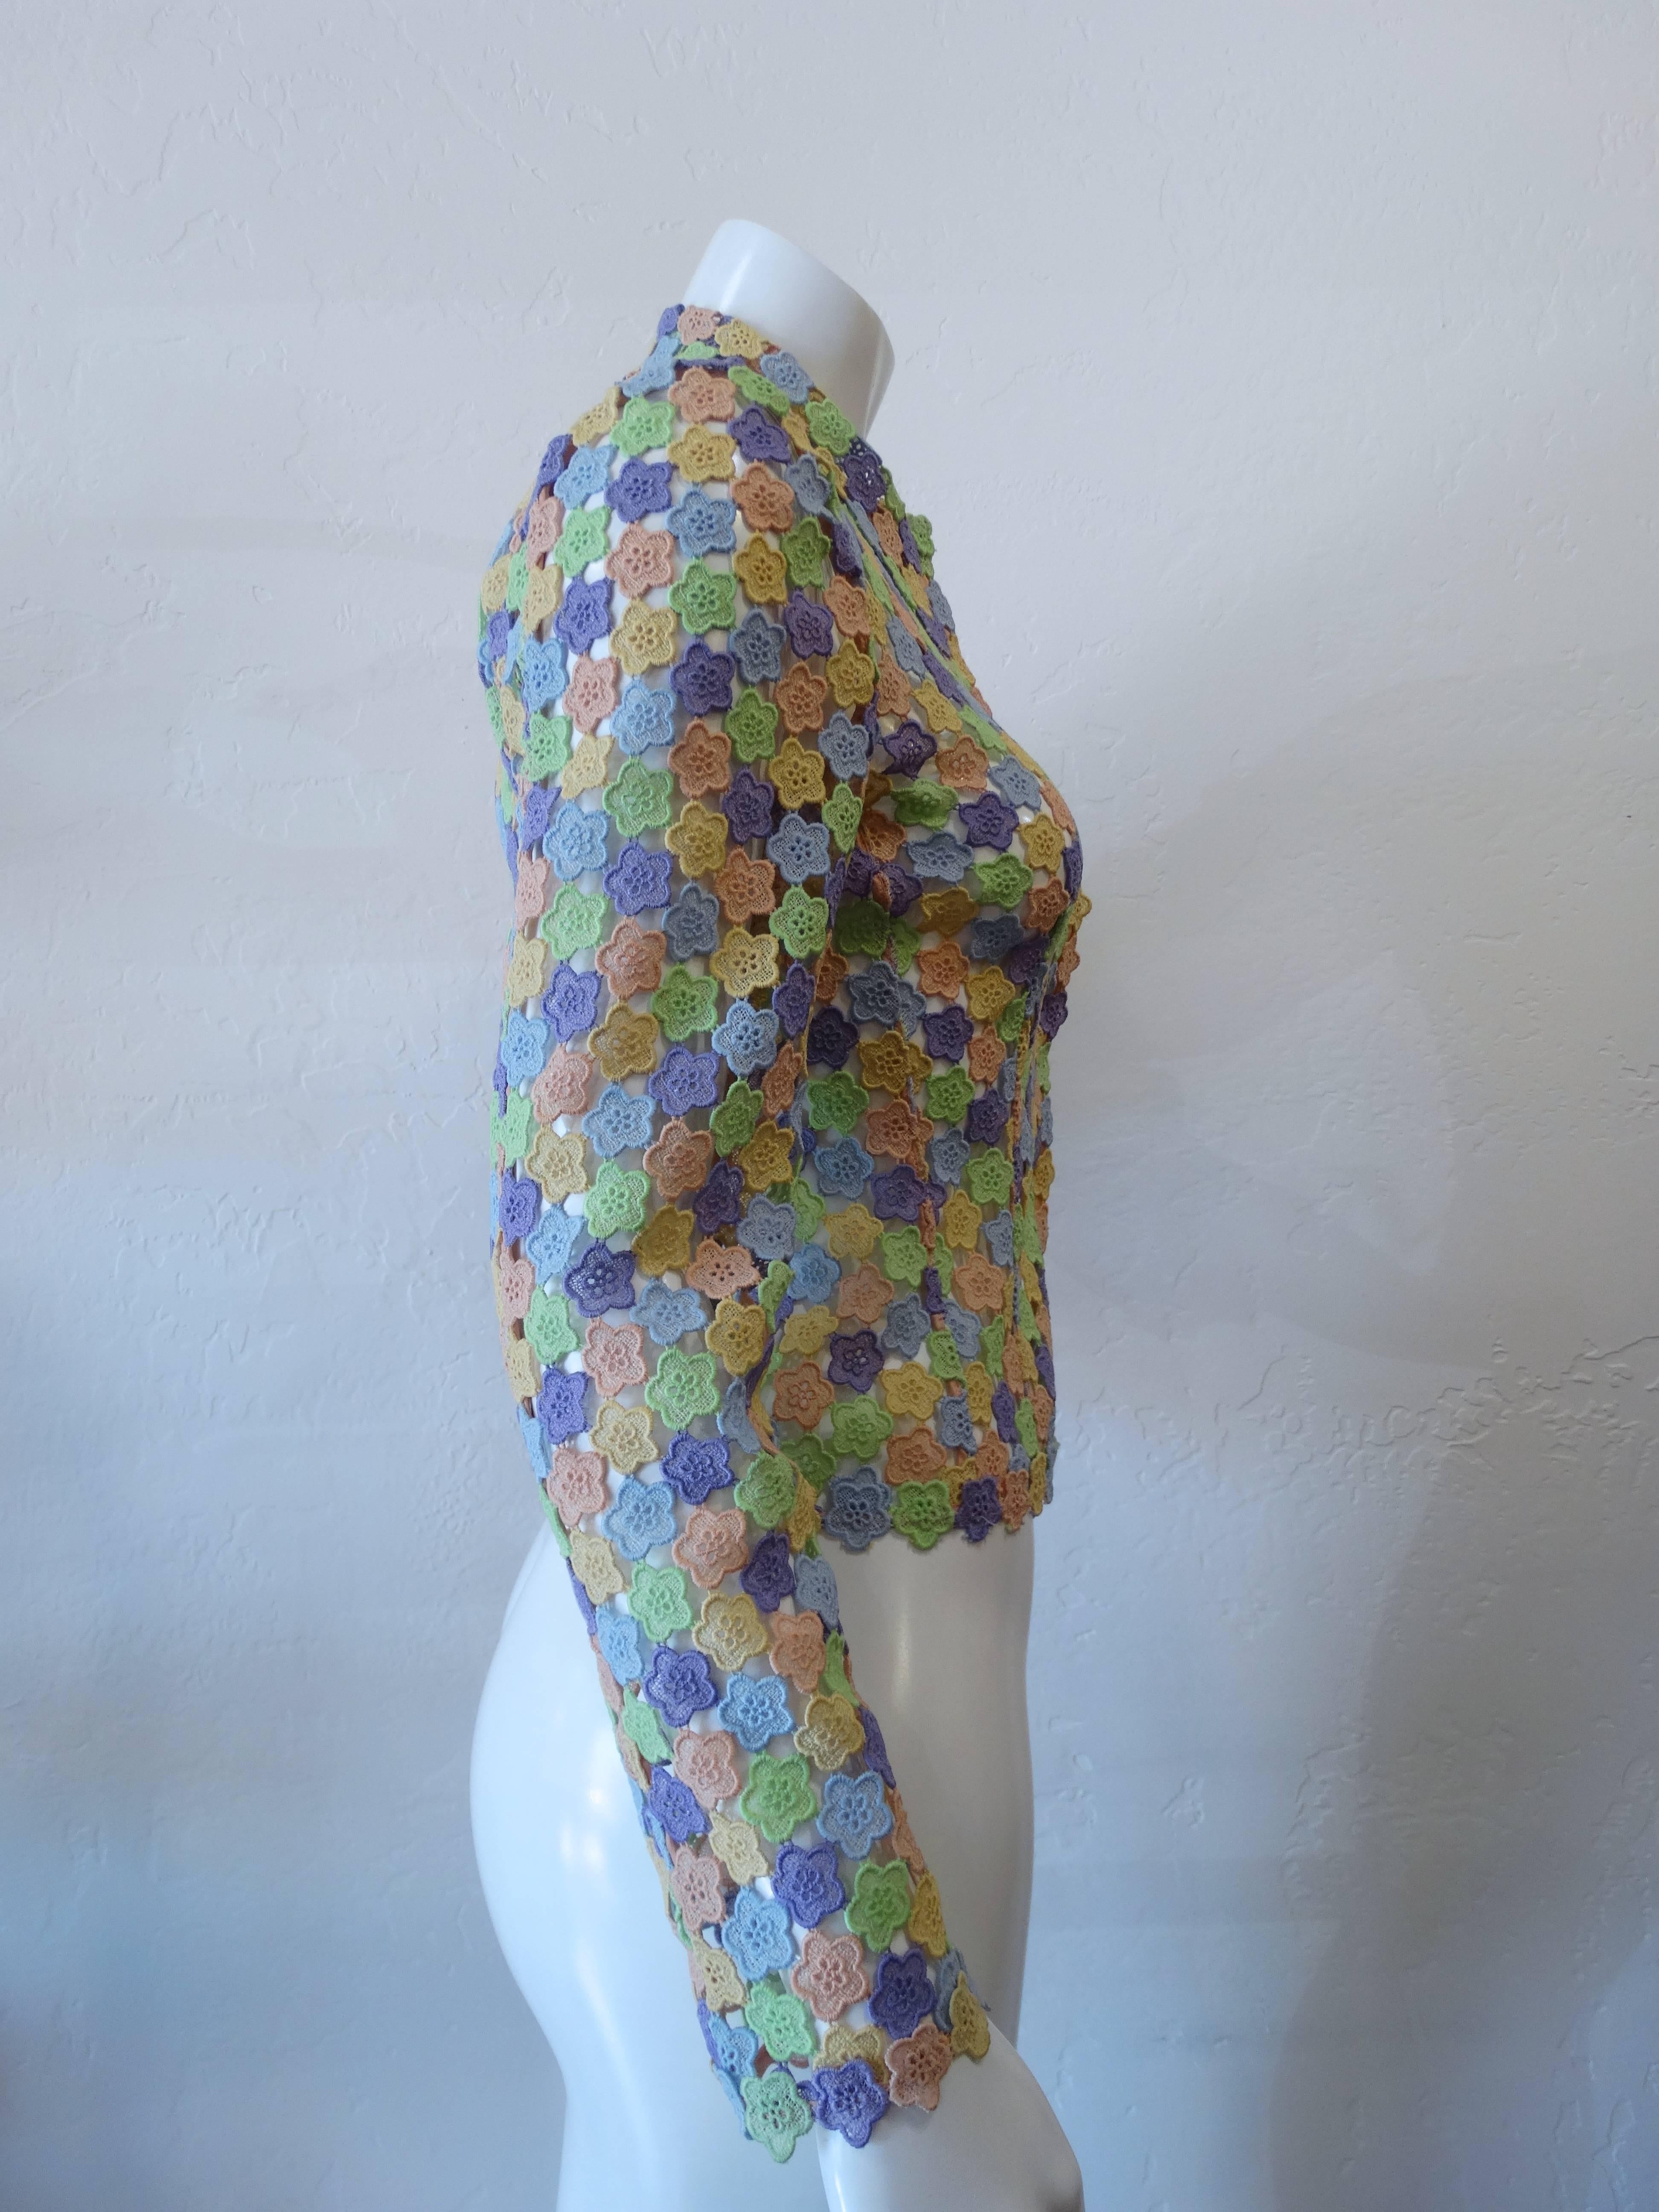 Late 1990s Moschino Cheap & Chic pastel floral blouse jacket. Pastel multicolored sheer floral fabric. Pointed collar neckline. Snaps up the front. Marked a size US 6, fits about a small/medium. 

Sleeve 24